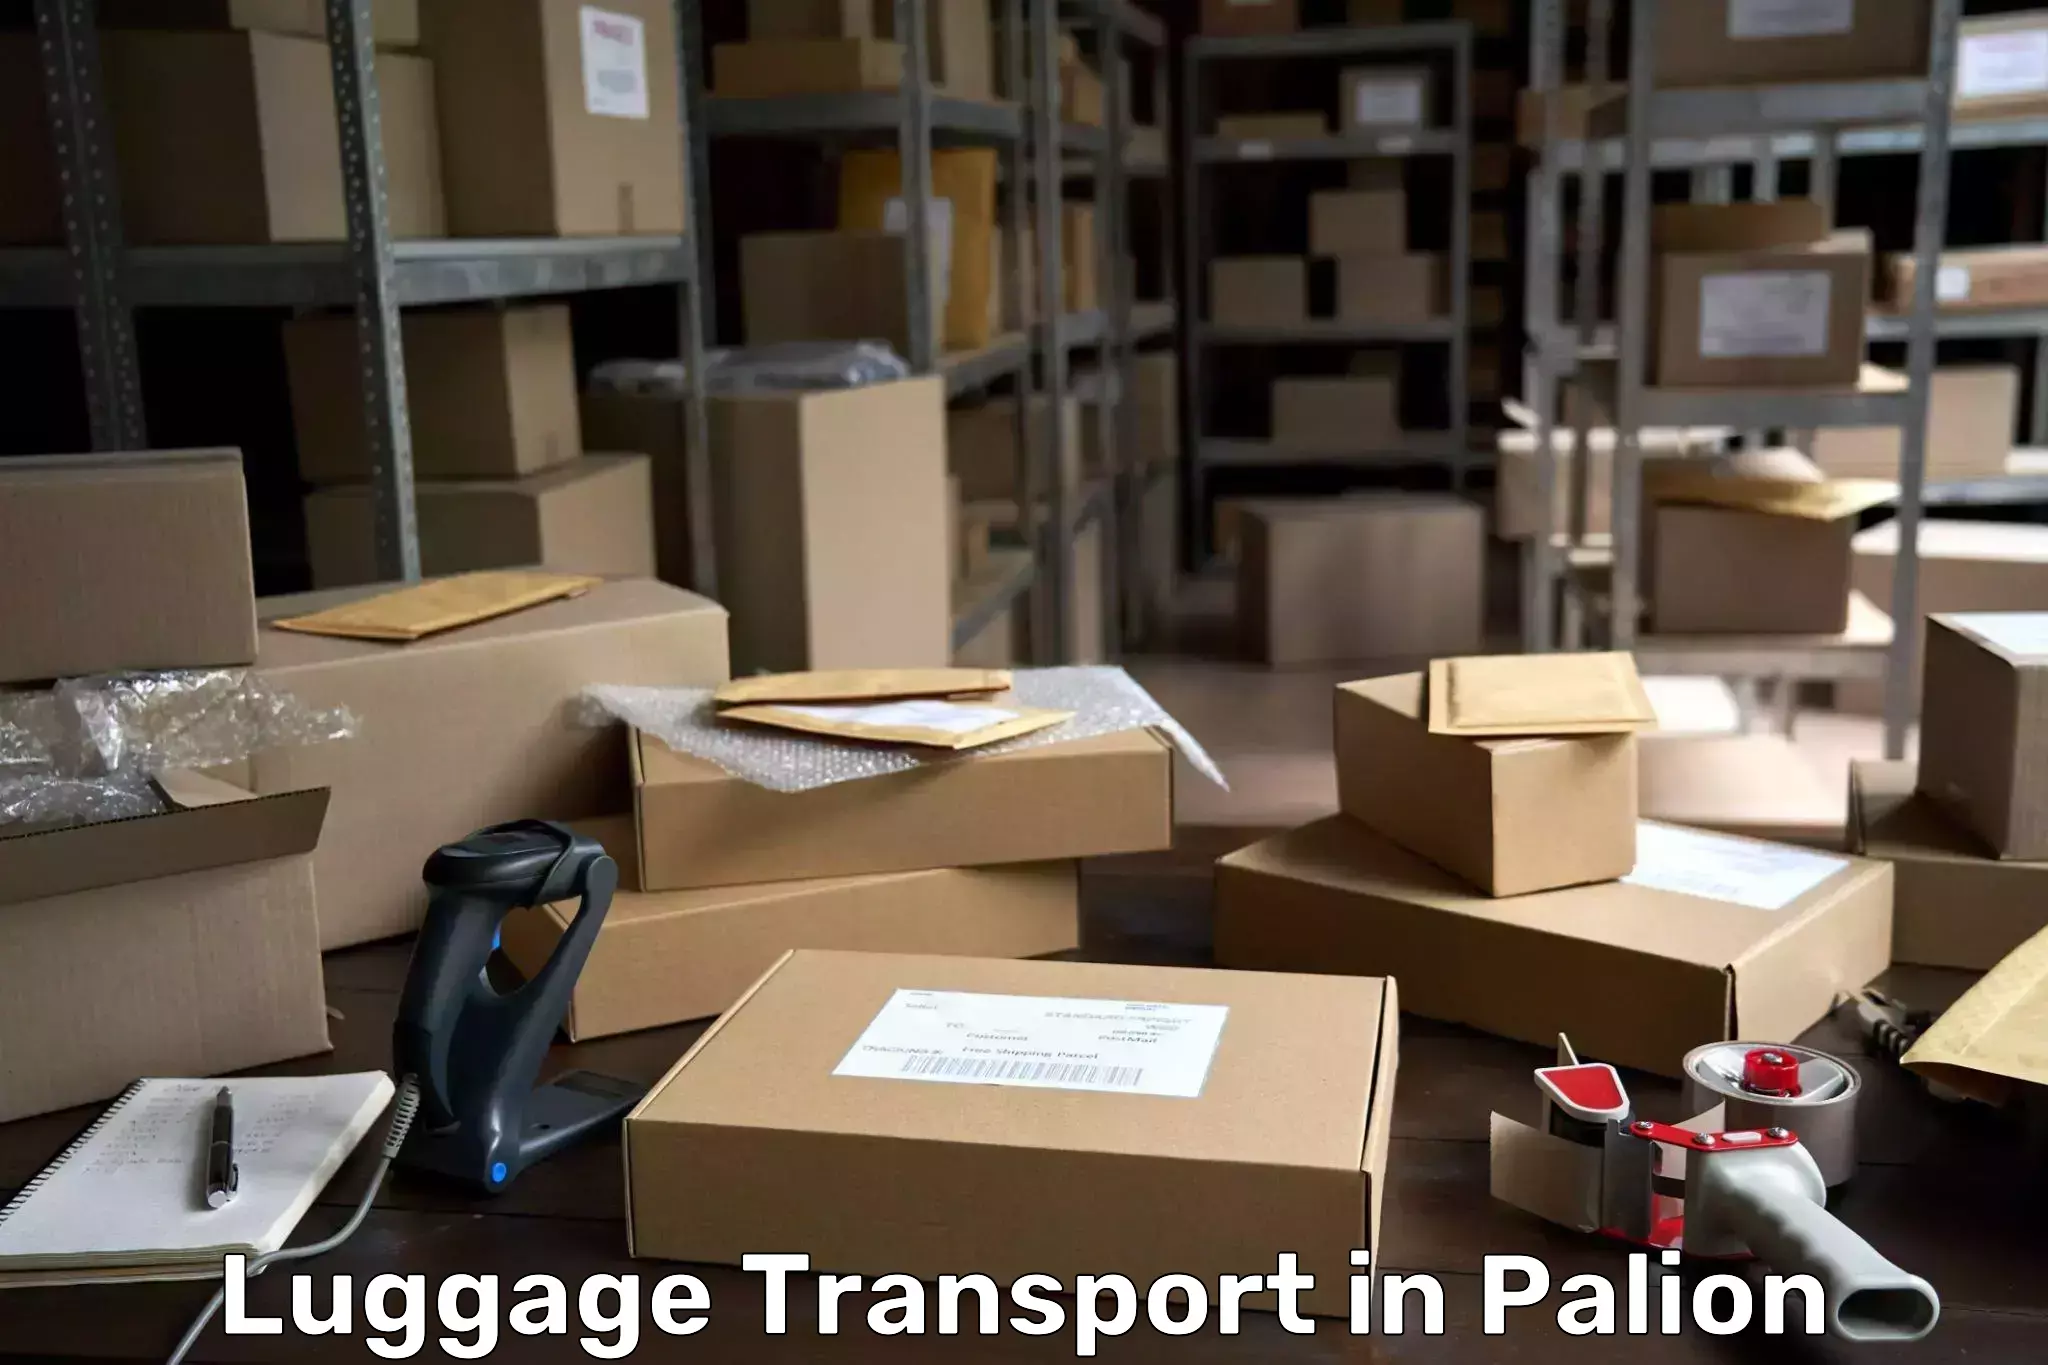 Luggage transport consulting in Palion